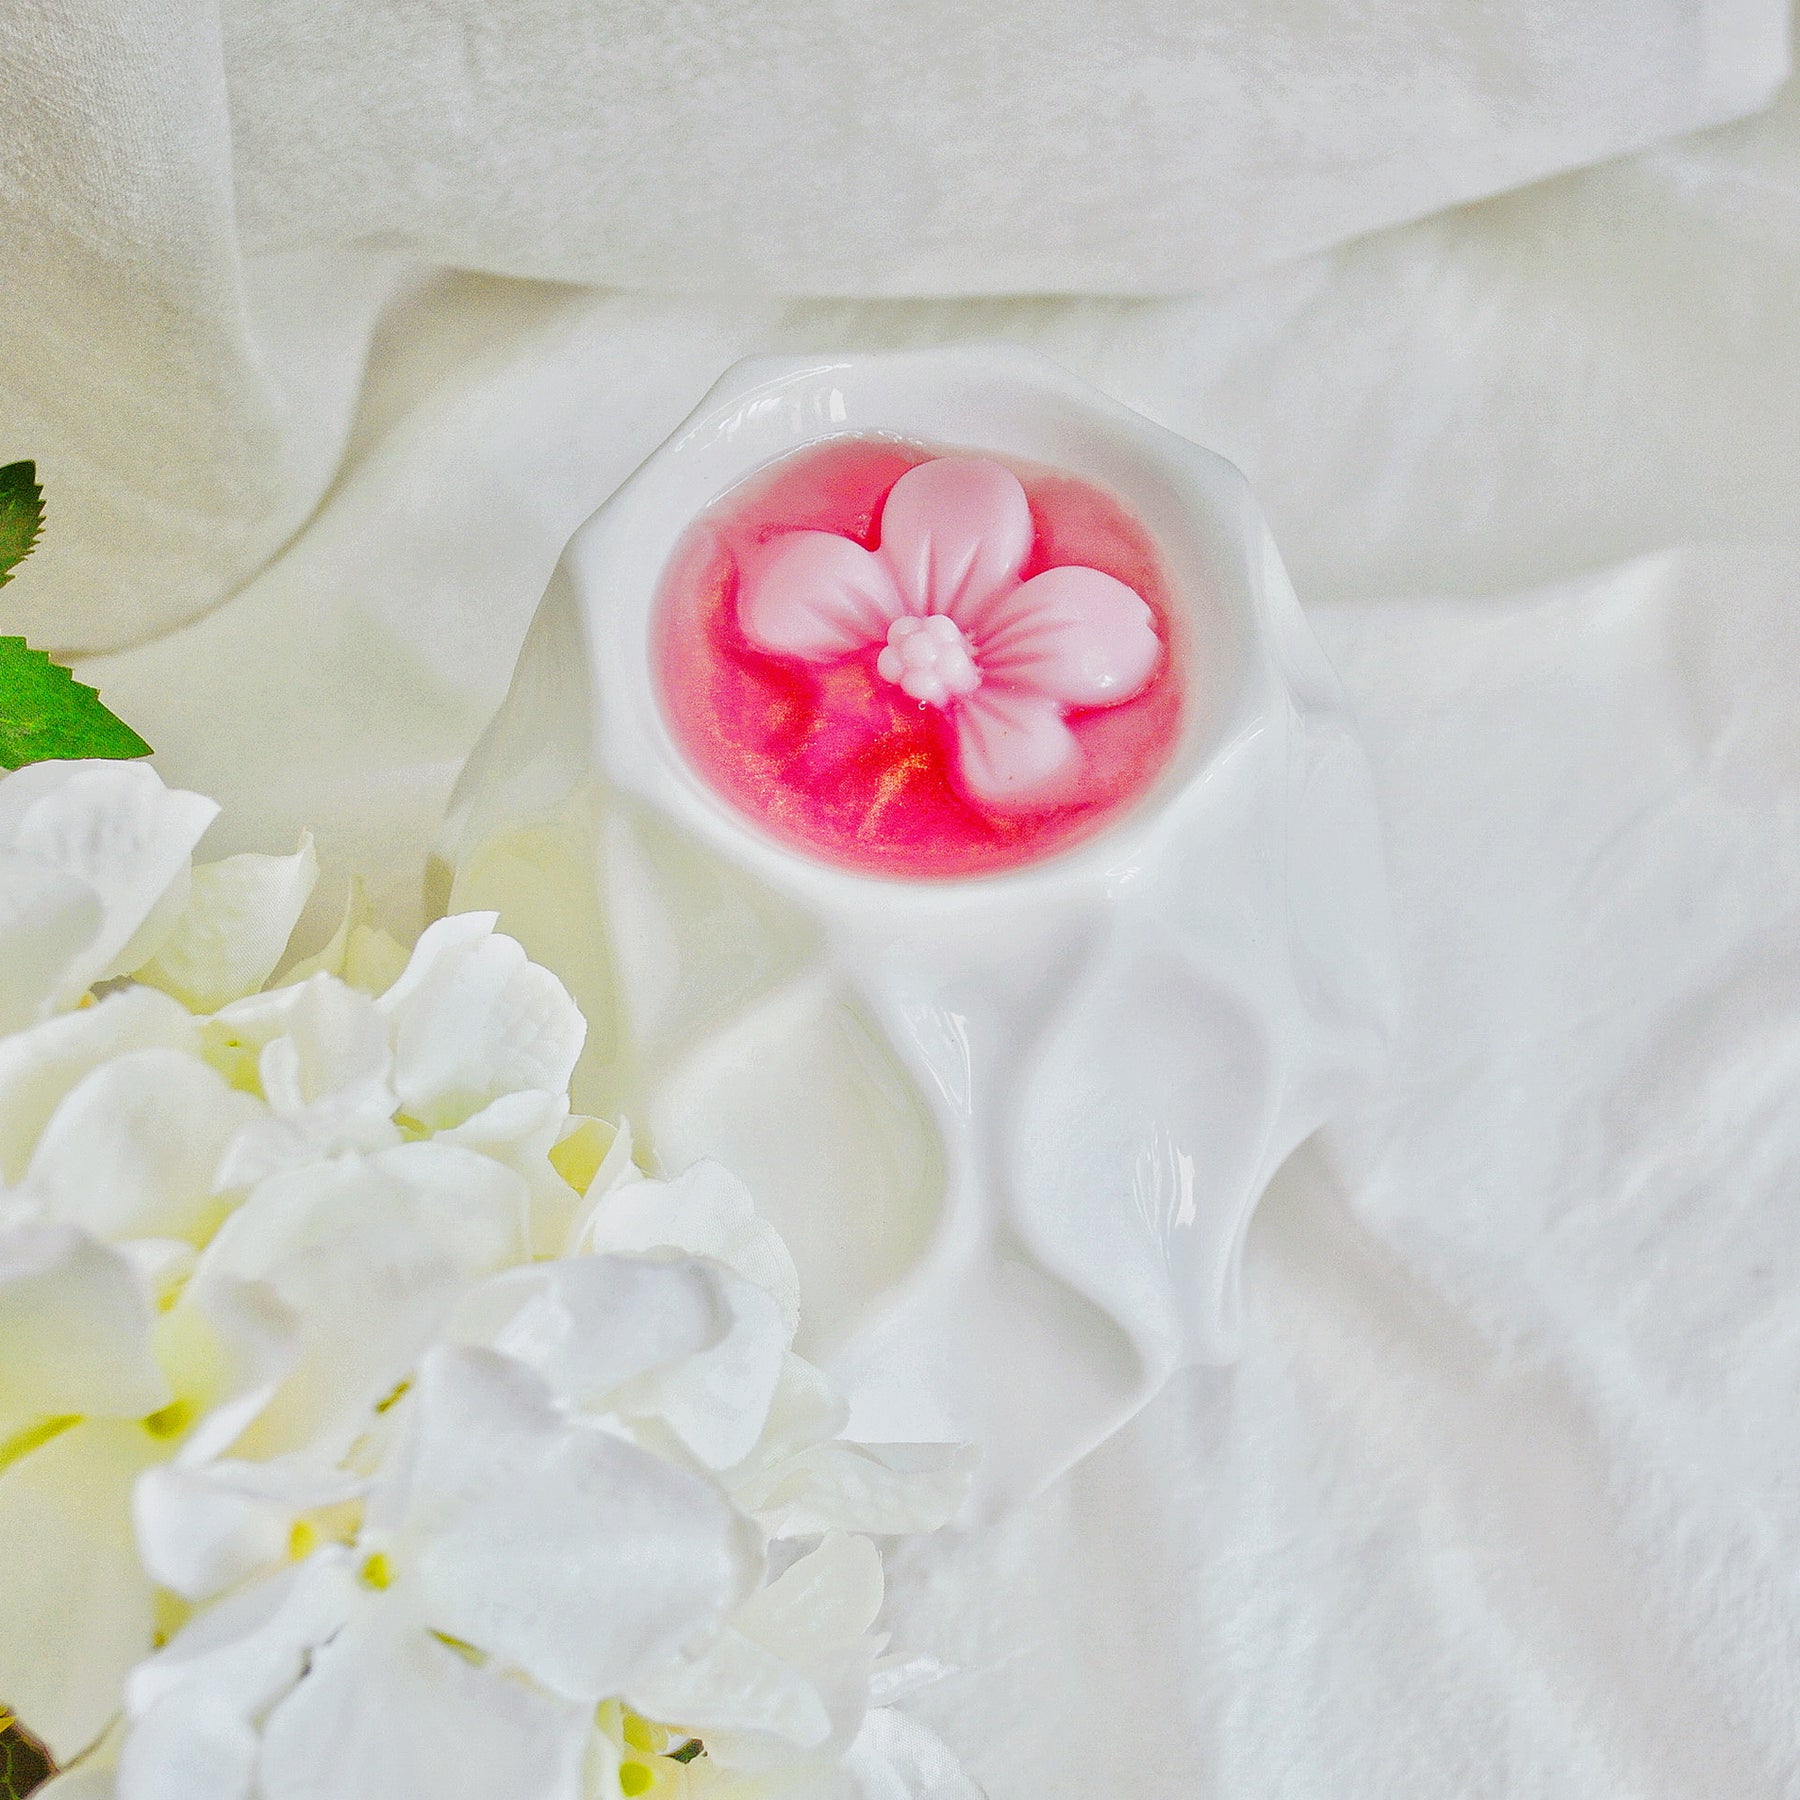 Six cherry blossom soy wax melts by LMJ Candles, beautifully presented on a ceramic warmer beside their eco-friendly cardboard box, highlighting their floral fragrance and vegan qualities.